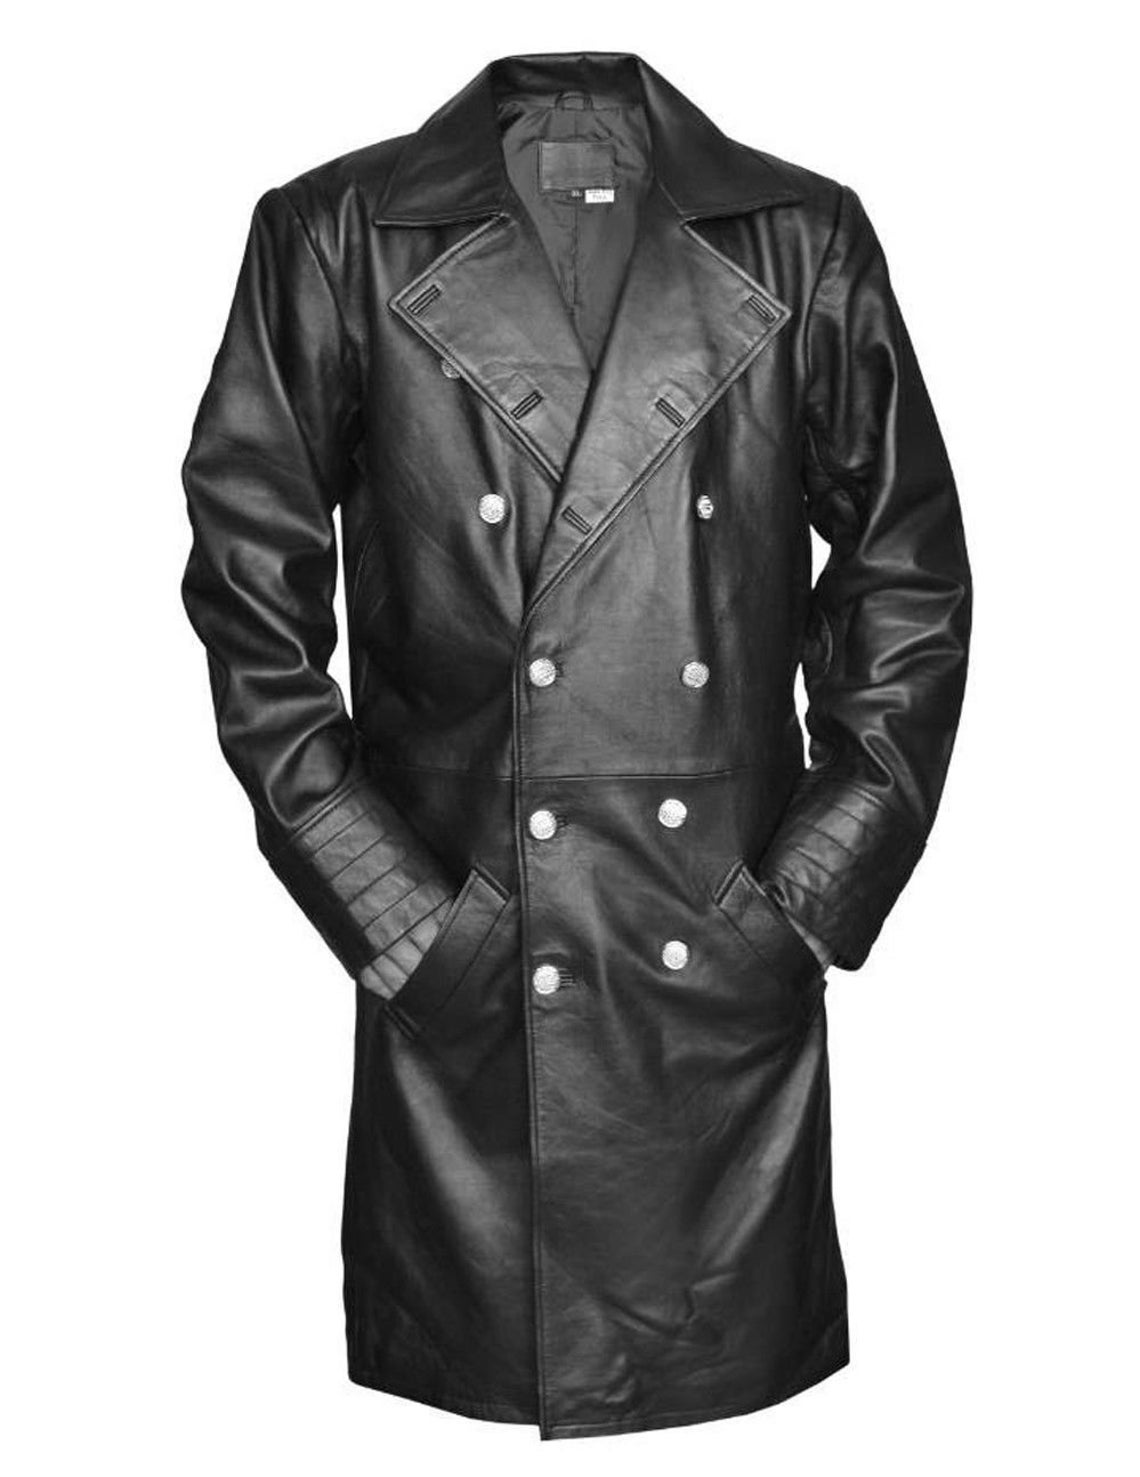 German General Major Men's Military Style Real Leather Jacket Trench ...